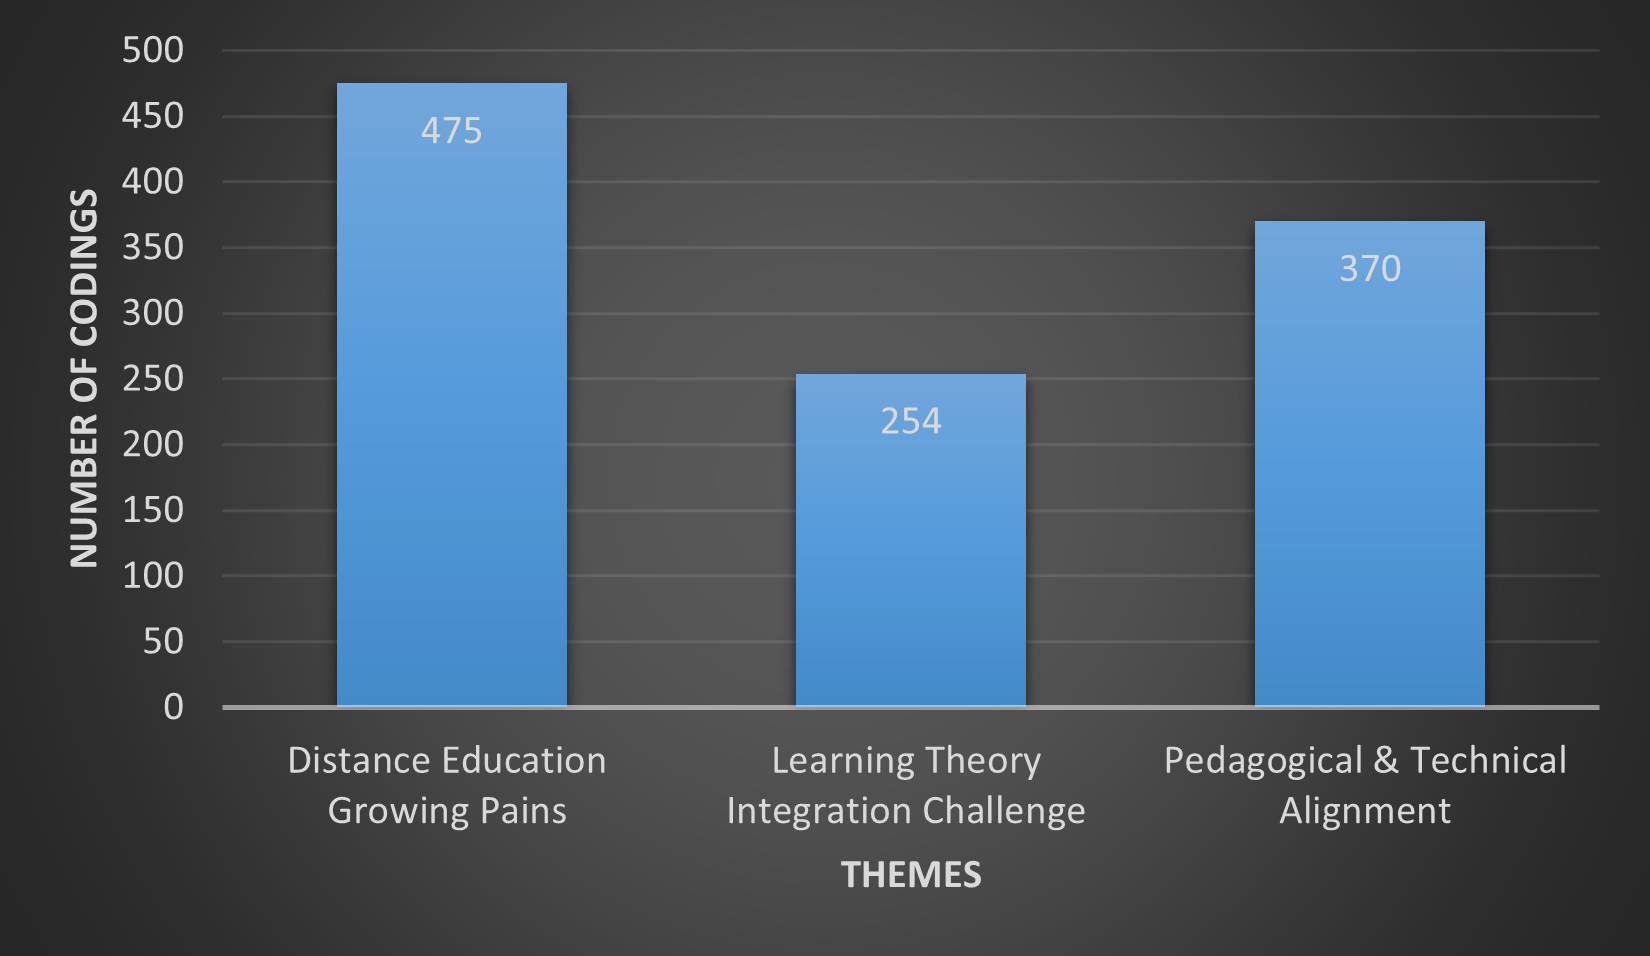 A bar graph shows the number of codings for this study which incorporated three themes (x-axis): Distance Education Growing Pains, Learning Theory, and Pedagogical and Technical Alignment. The first bar, distance education growing pains shows a 43 per cent occurrence with a total of 475 responses (y-axis). Learning theory responses were recorded as 23% or 254 of the total responses. Pedagogical and Technical Alignment accounted for 34% of the responses with 370 of the total responses recorded.